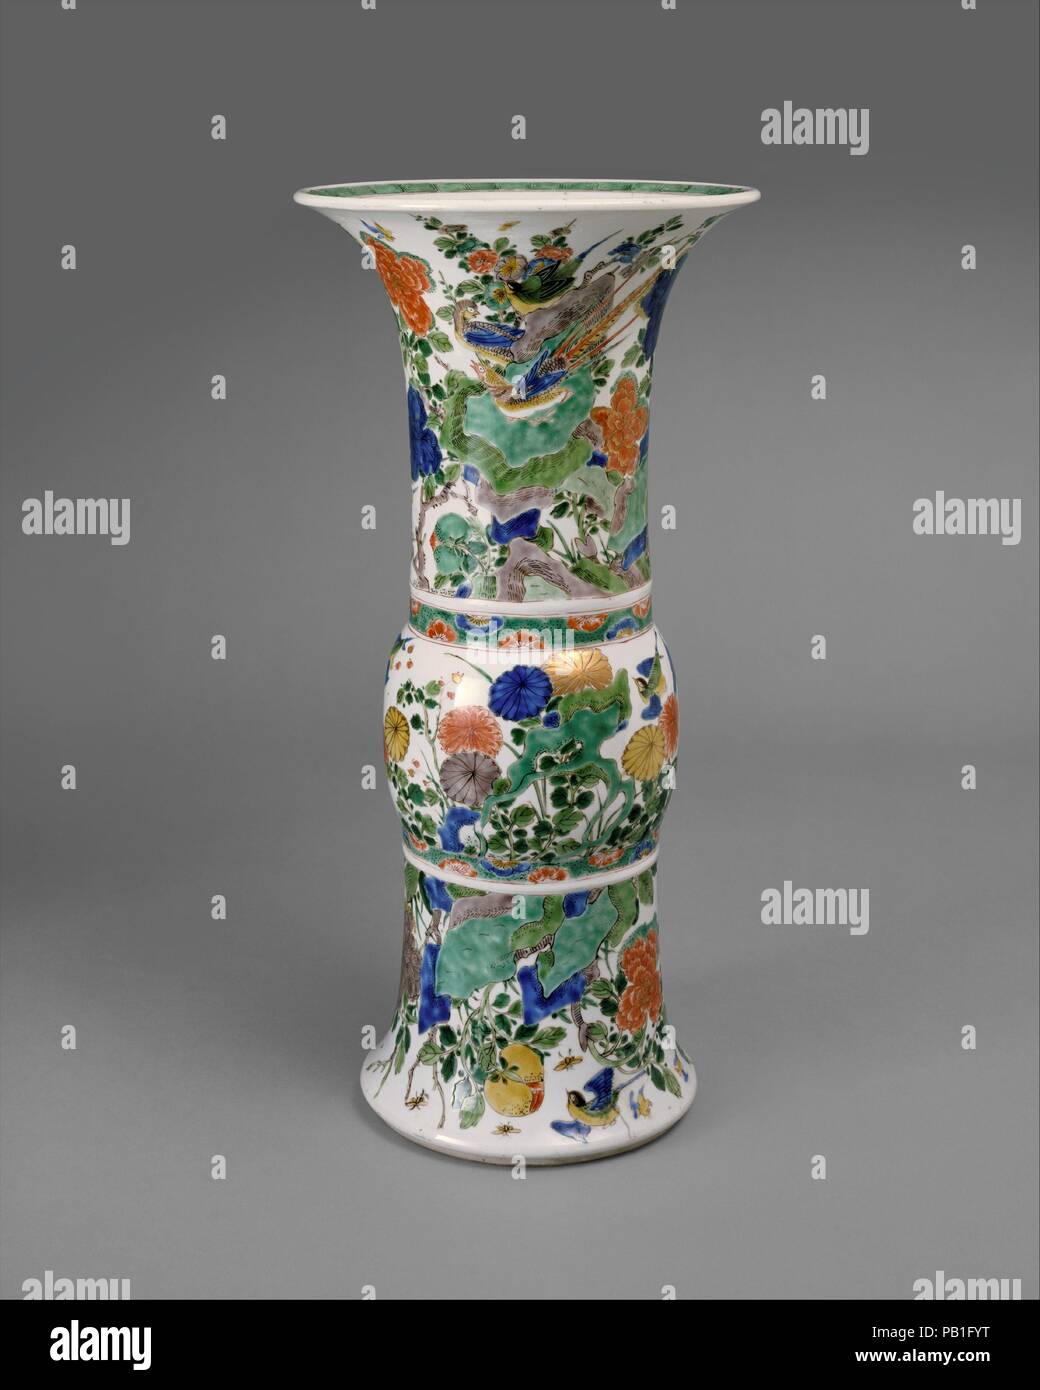 Vase in Shape of Archaic Bronze Vessel with Flowers and Birds. Culture: China. Dimensions: H. 18 in. (45.7 cm). Date: late 17th-early 18th century.  The shape of this vase ultimately derives from archaic vessels used to serve and store wines. The decoration of flowers and birds is ubiquitous in Chinese art; however, the palette used to decorate the piece evolved in the seventeenth century as a refinement of earlier traditions. Museum: Metropolitan Museum of Art, New York, USA. Stock Photo